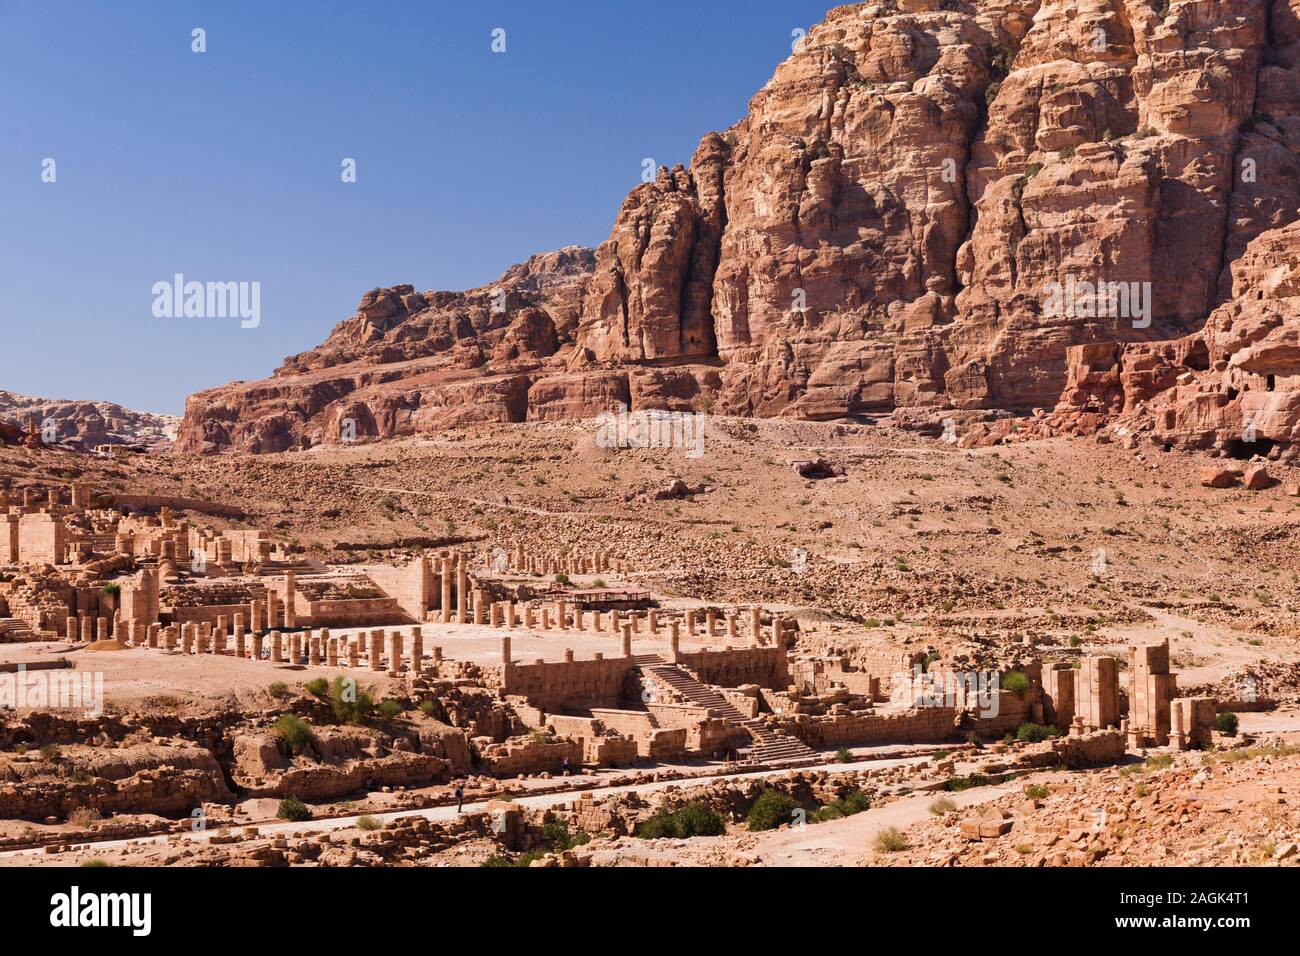 Petra, the Colonnade street, the Great Temple, the Gate of Temenos, old architecture, Jordan, middle east, Asia Stock Photo